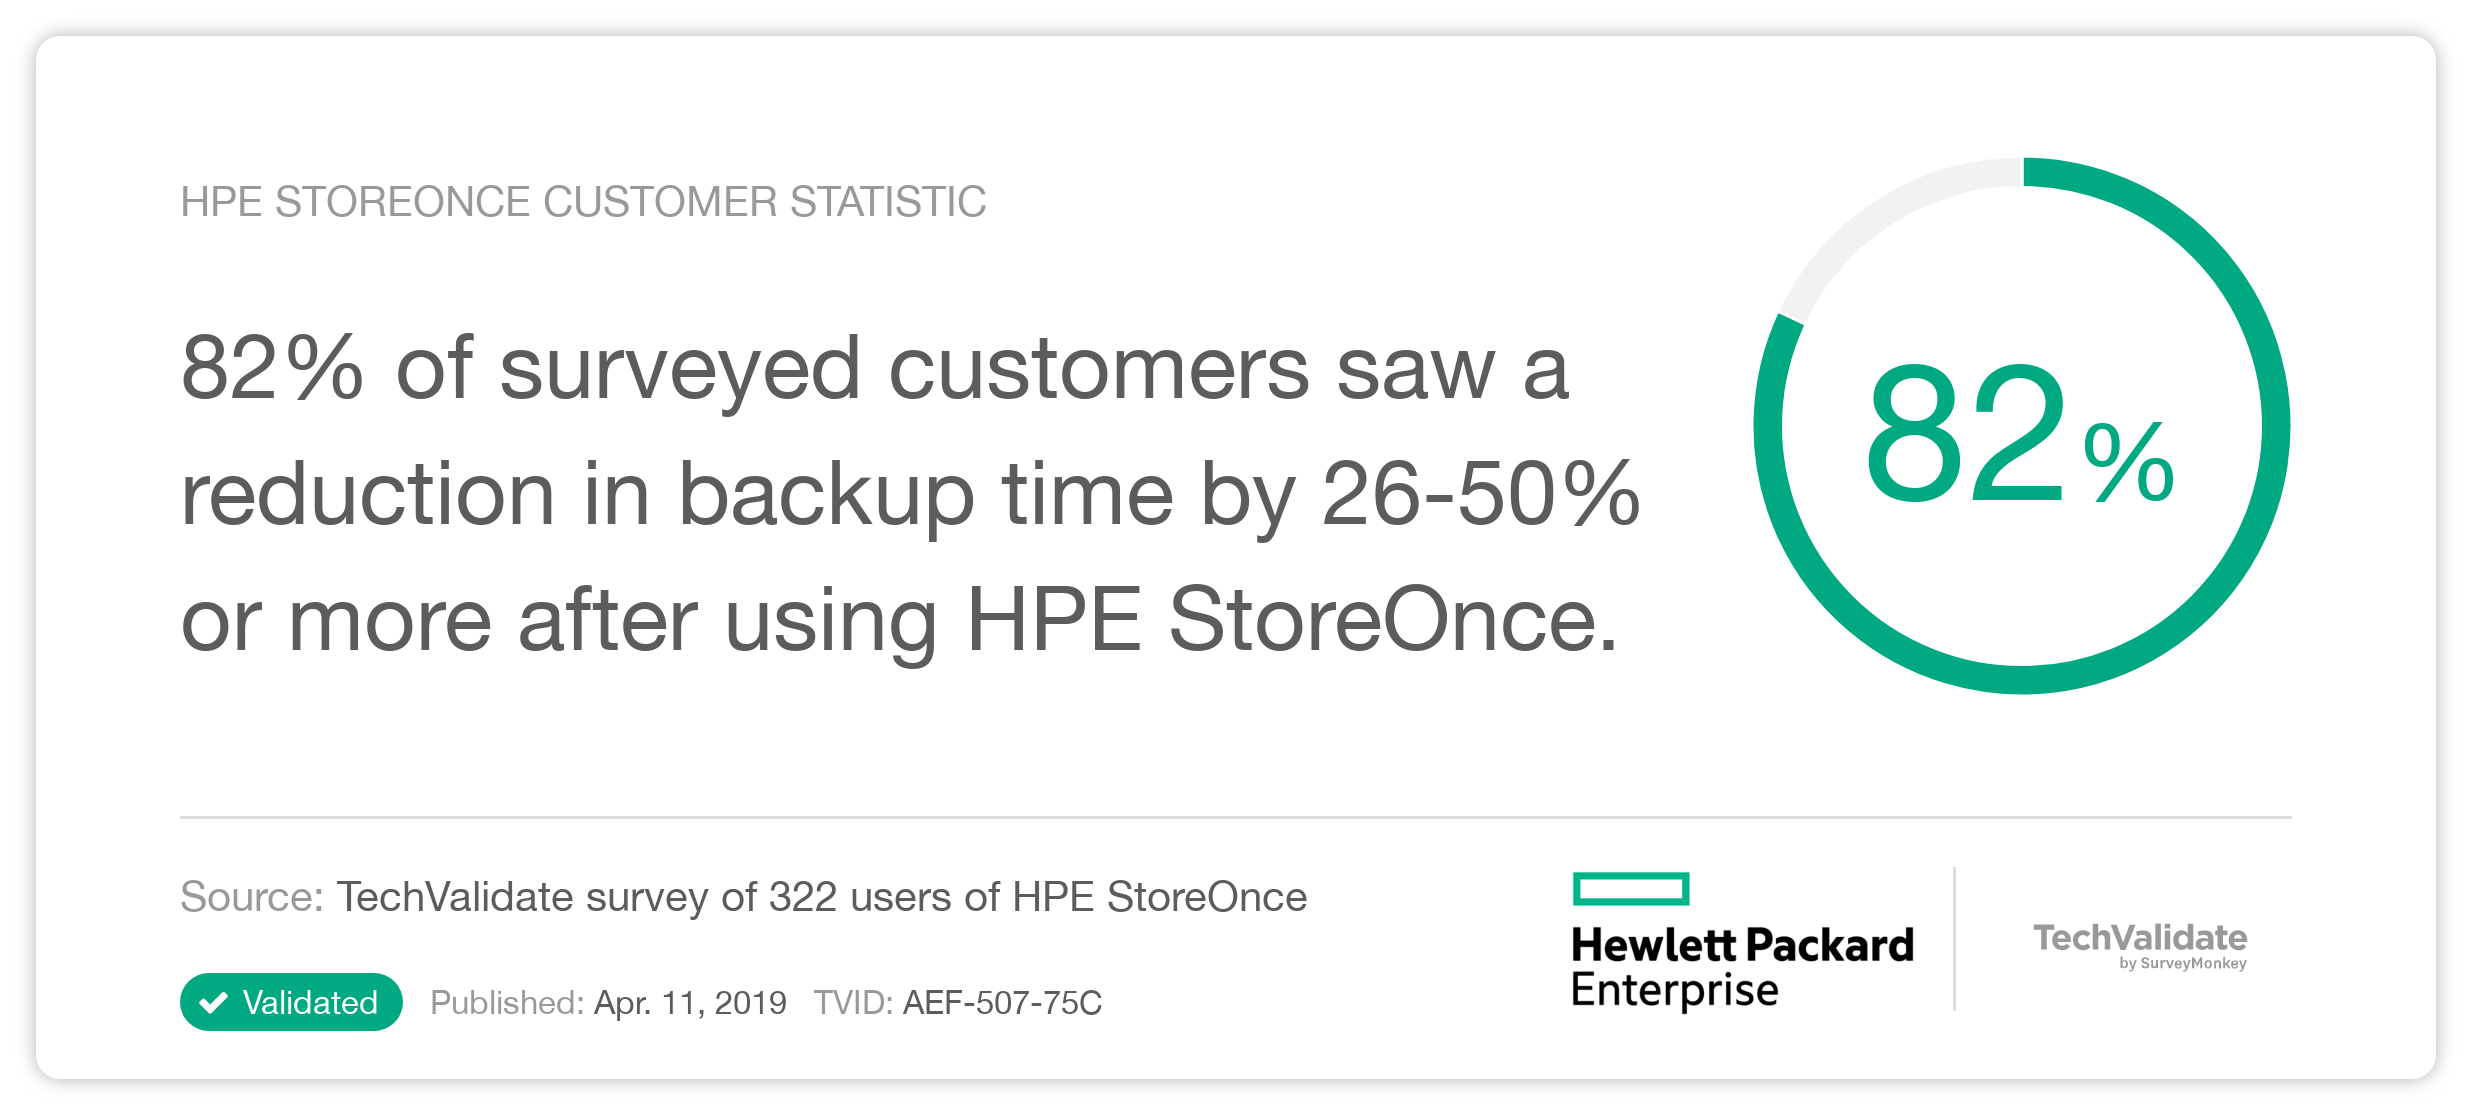 HPE StoreOnce Customer Statistic